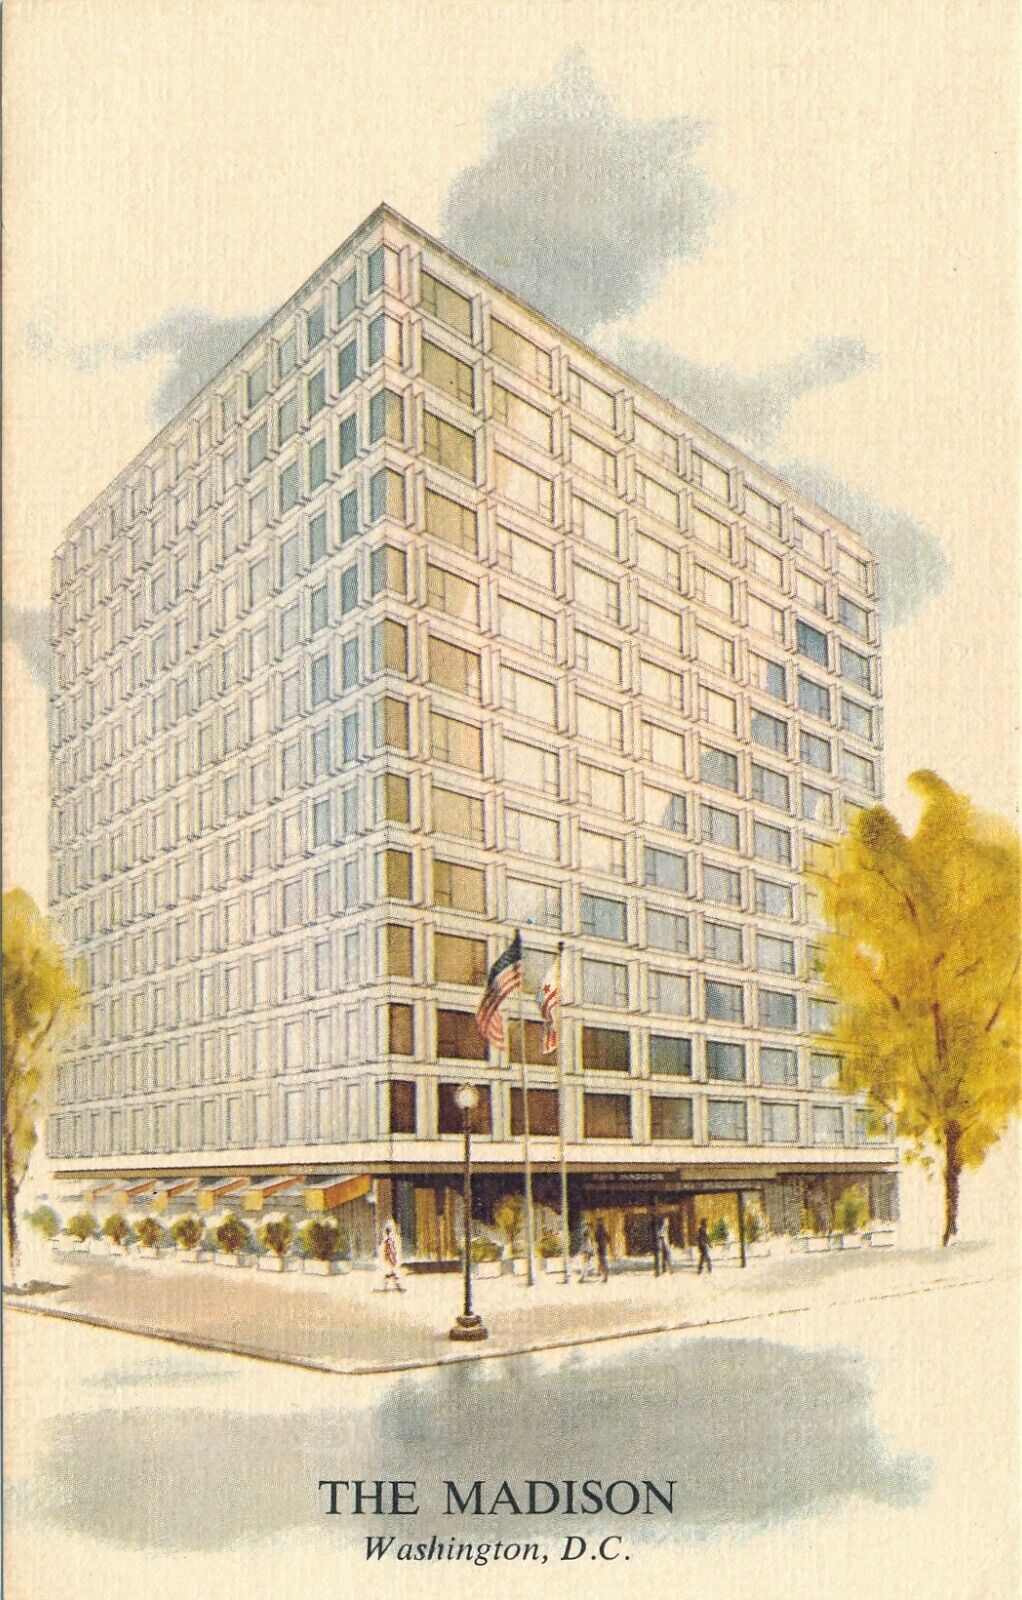 The Madison Hotel in Washington, D.C. vintage unposted